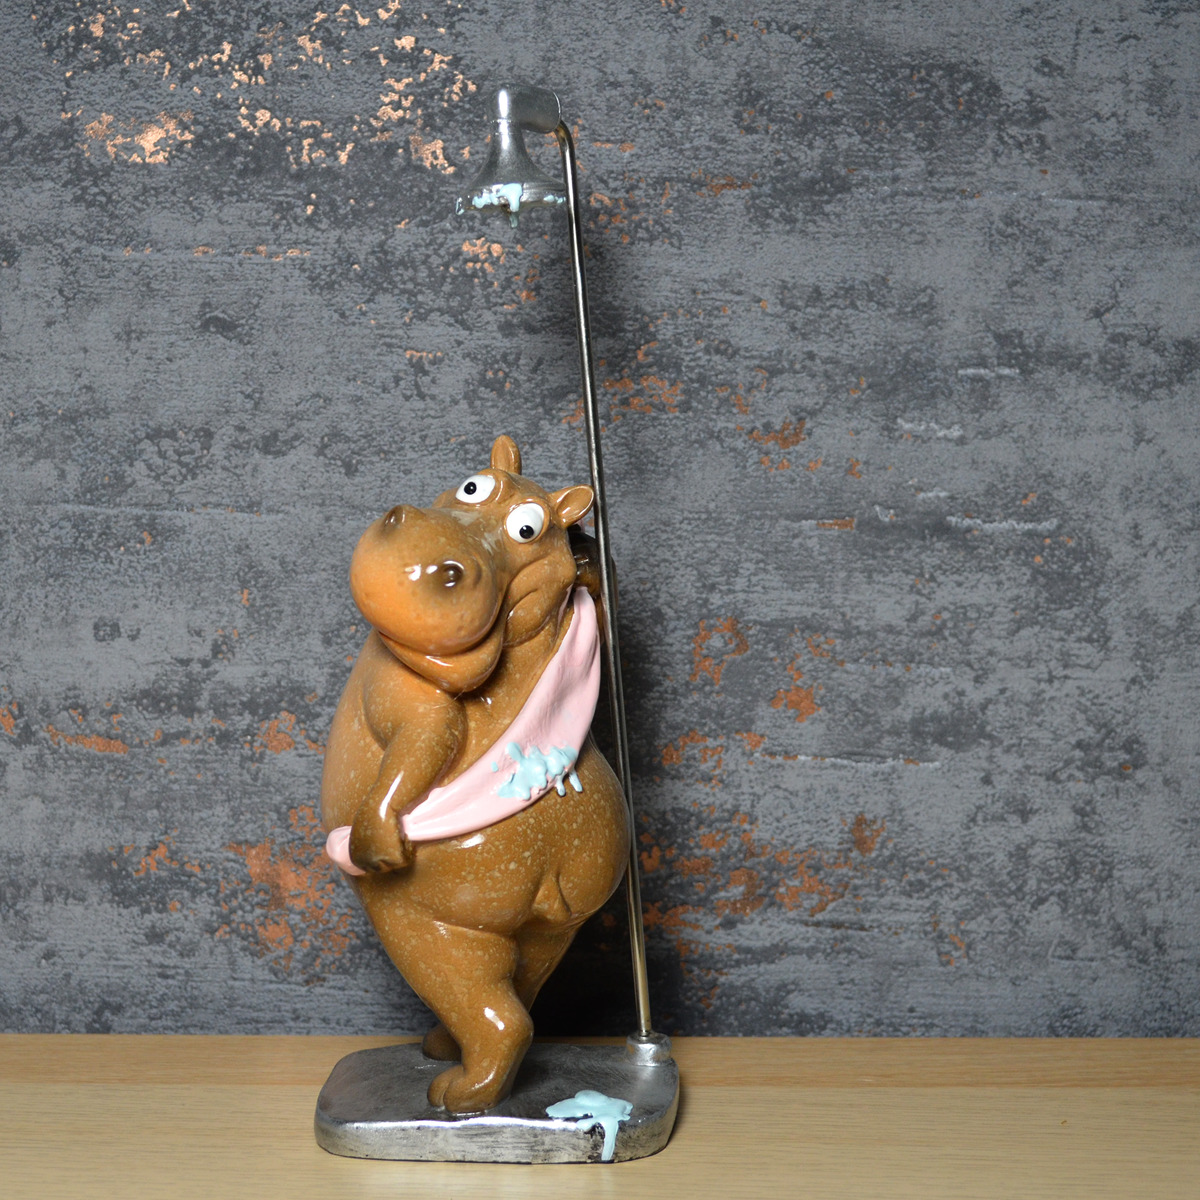 Comical Hippo In The Shower Figurine Novelty Statue Ornament New & Boxed 24cm